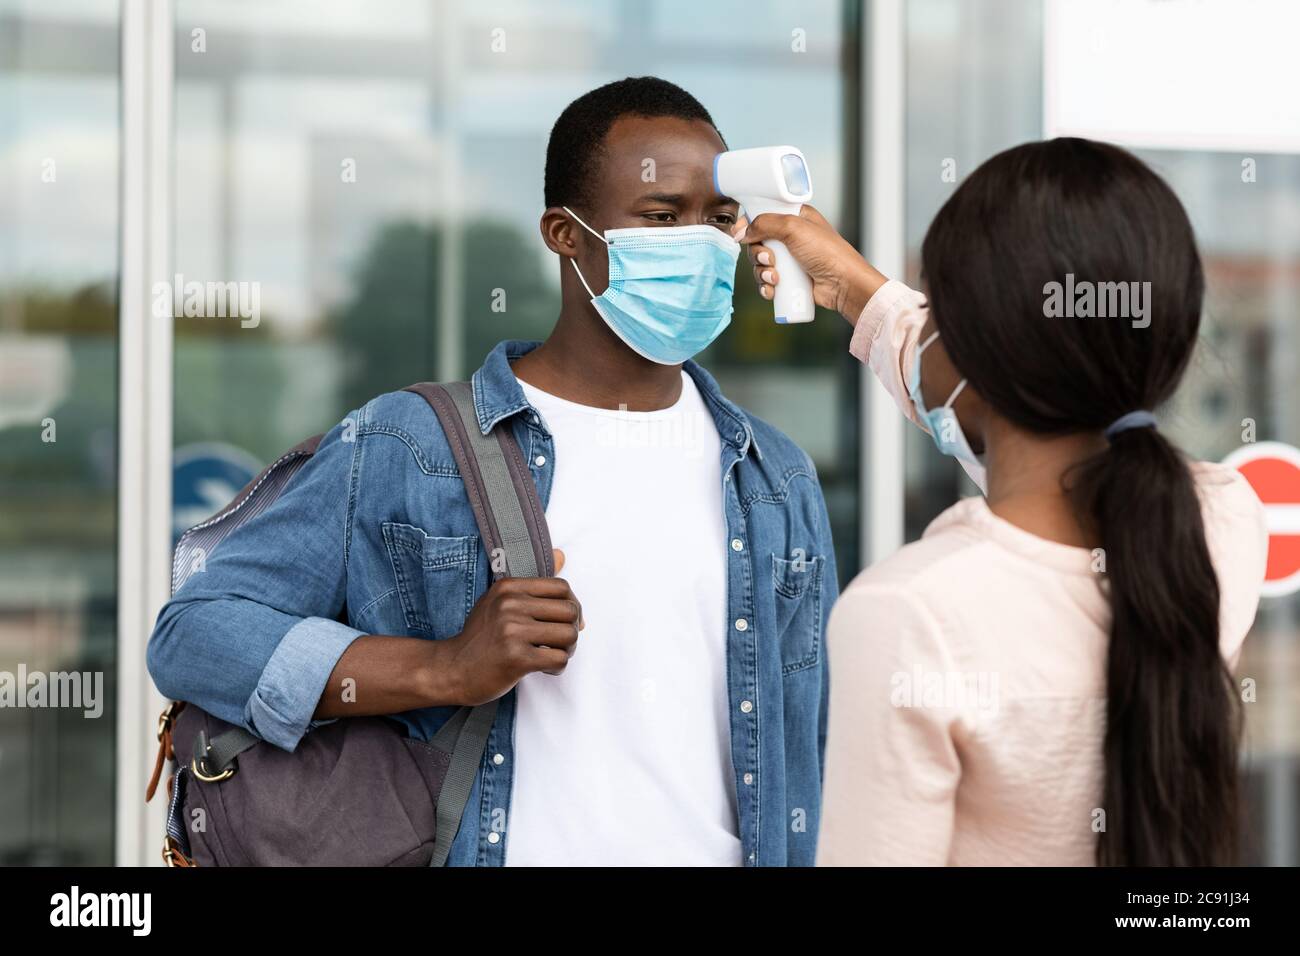 Airport Worker Checking Black Male Passenger Temperature With Electronic Thermometer After Arrival Stock Photo